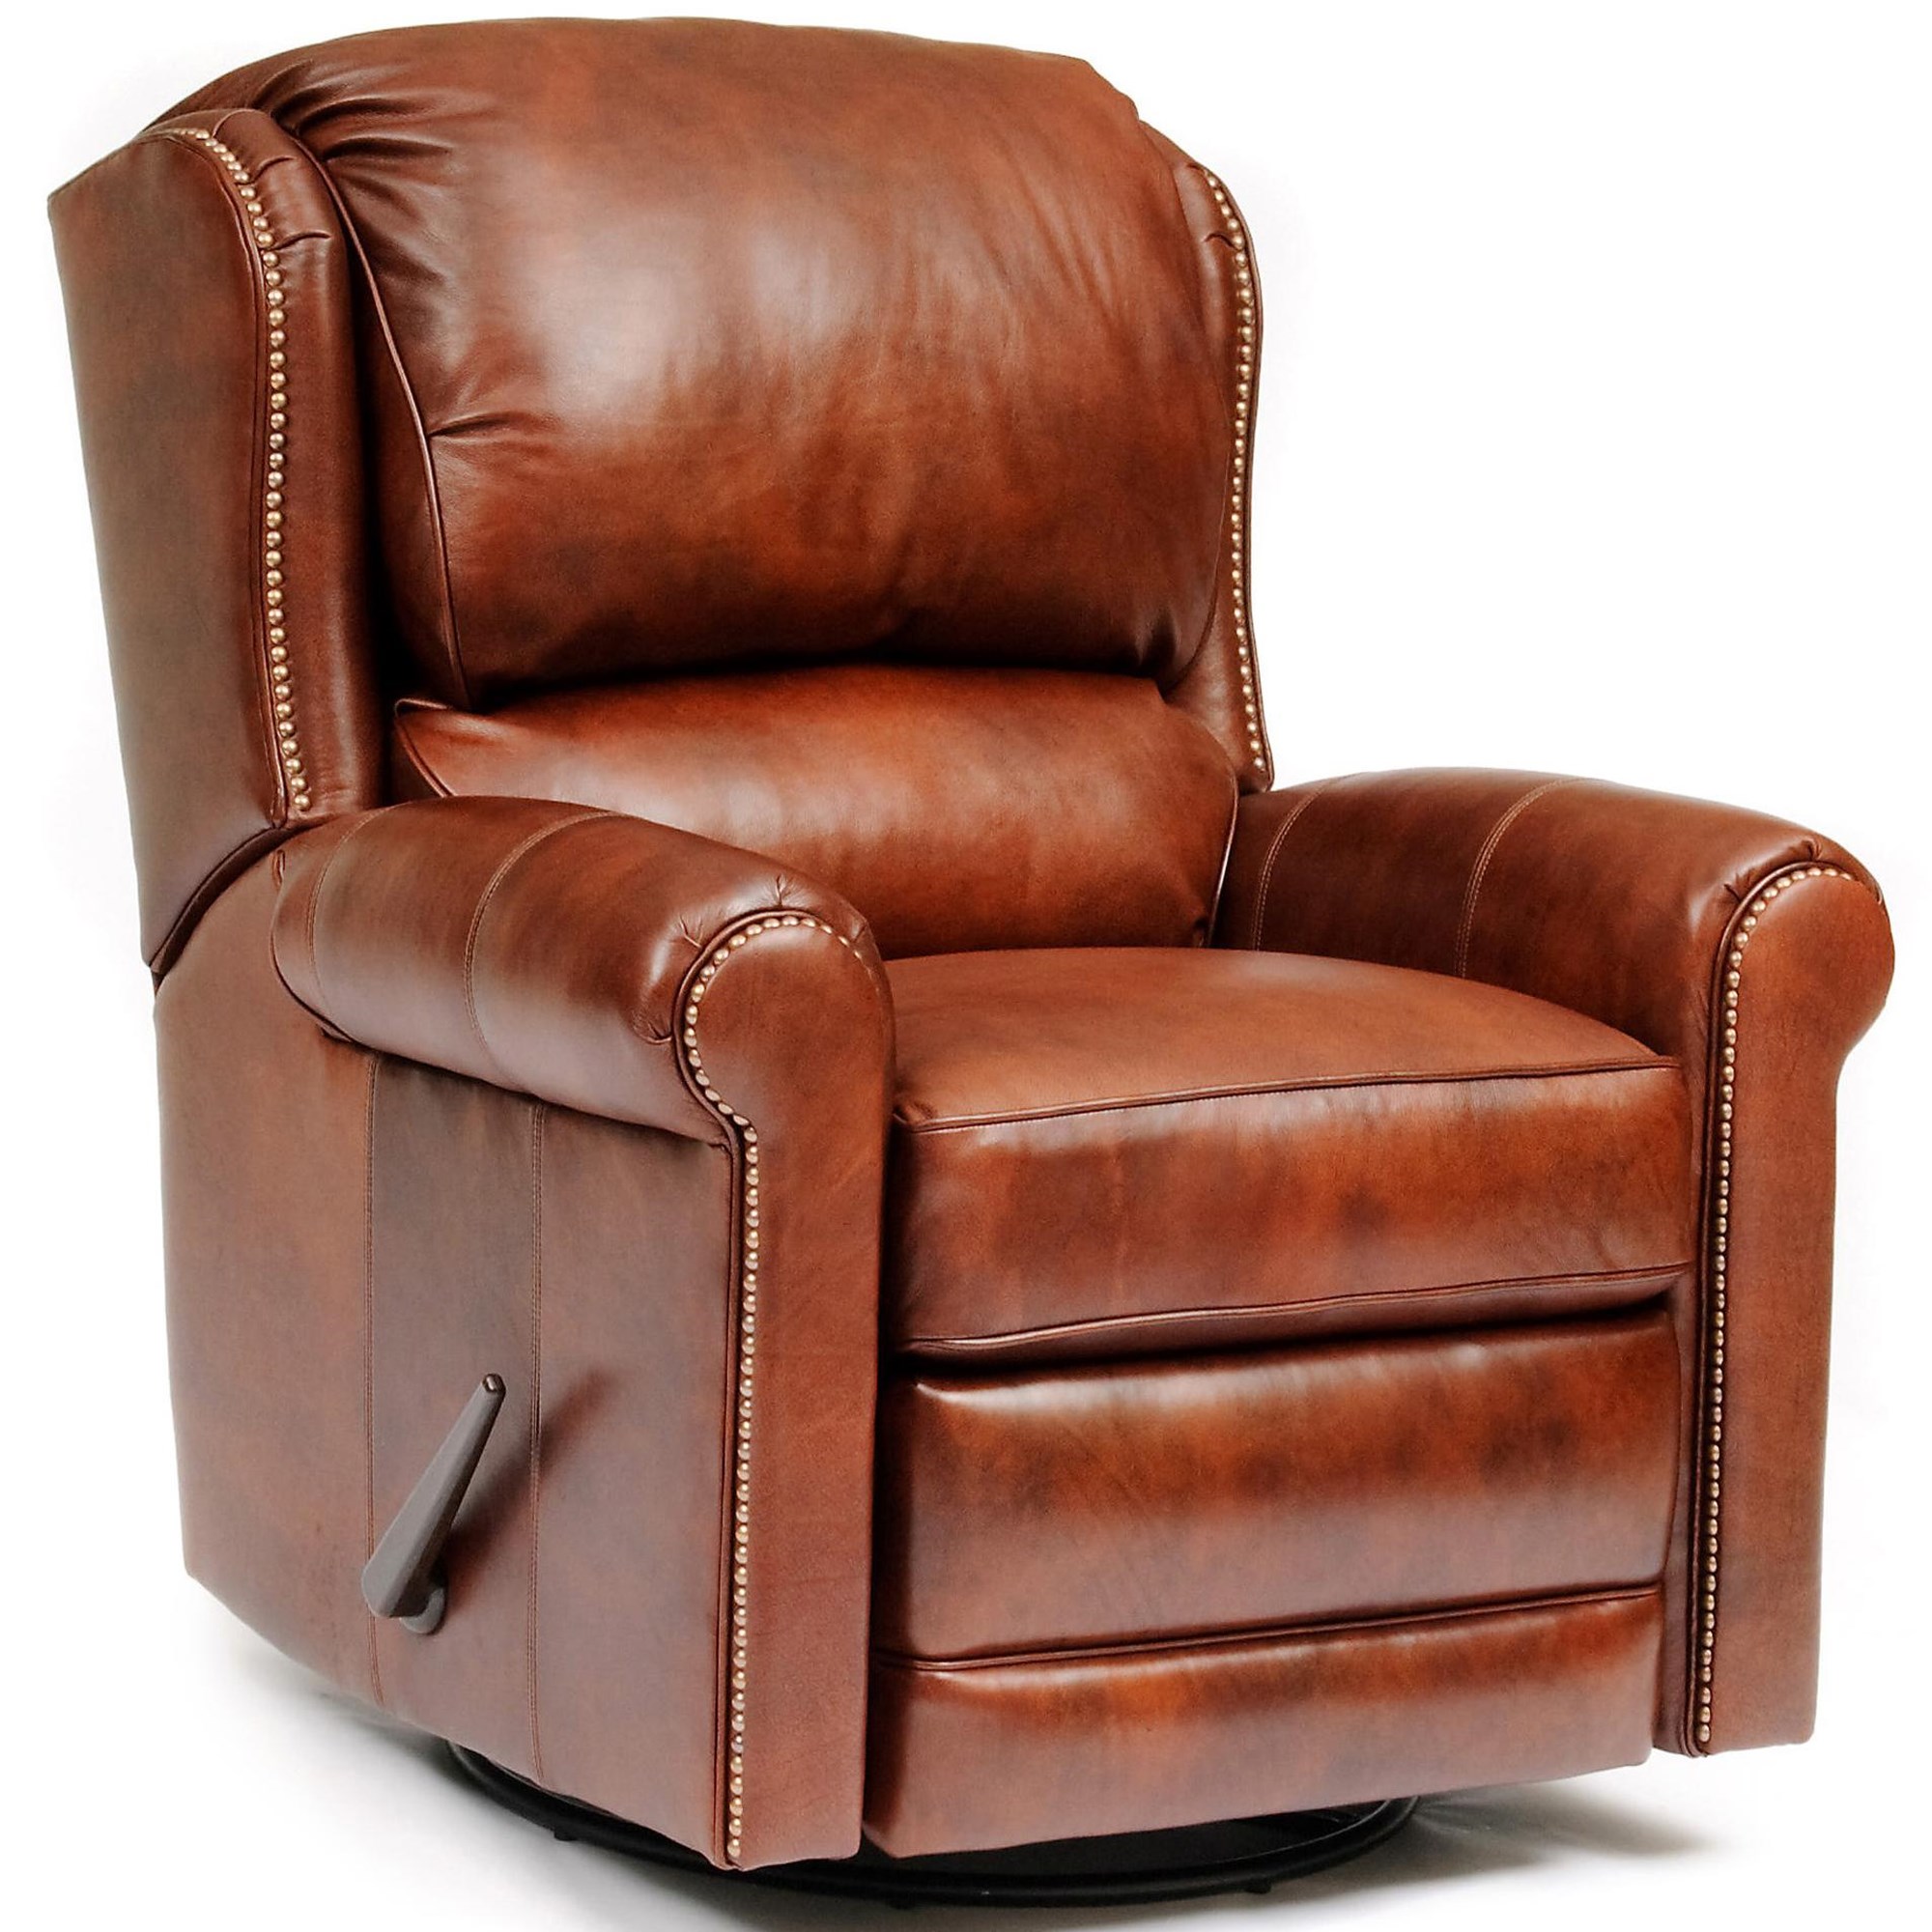 Smith Brothers 720L 000720598818 Casual Leather Swivel Glider Reclining  Chair | Weinberger\'s Furniture | Recliner - Three Way